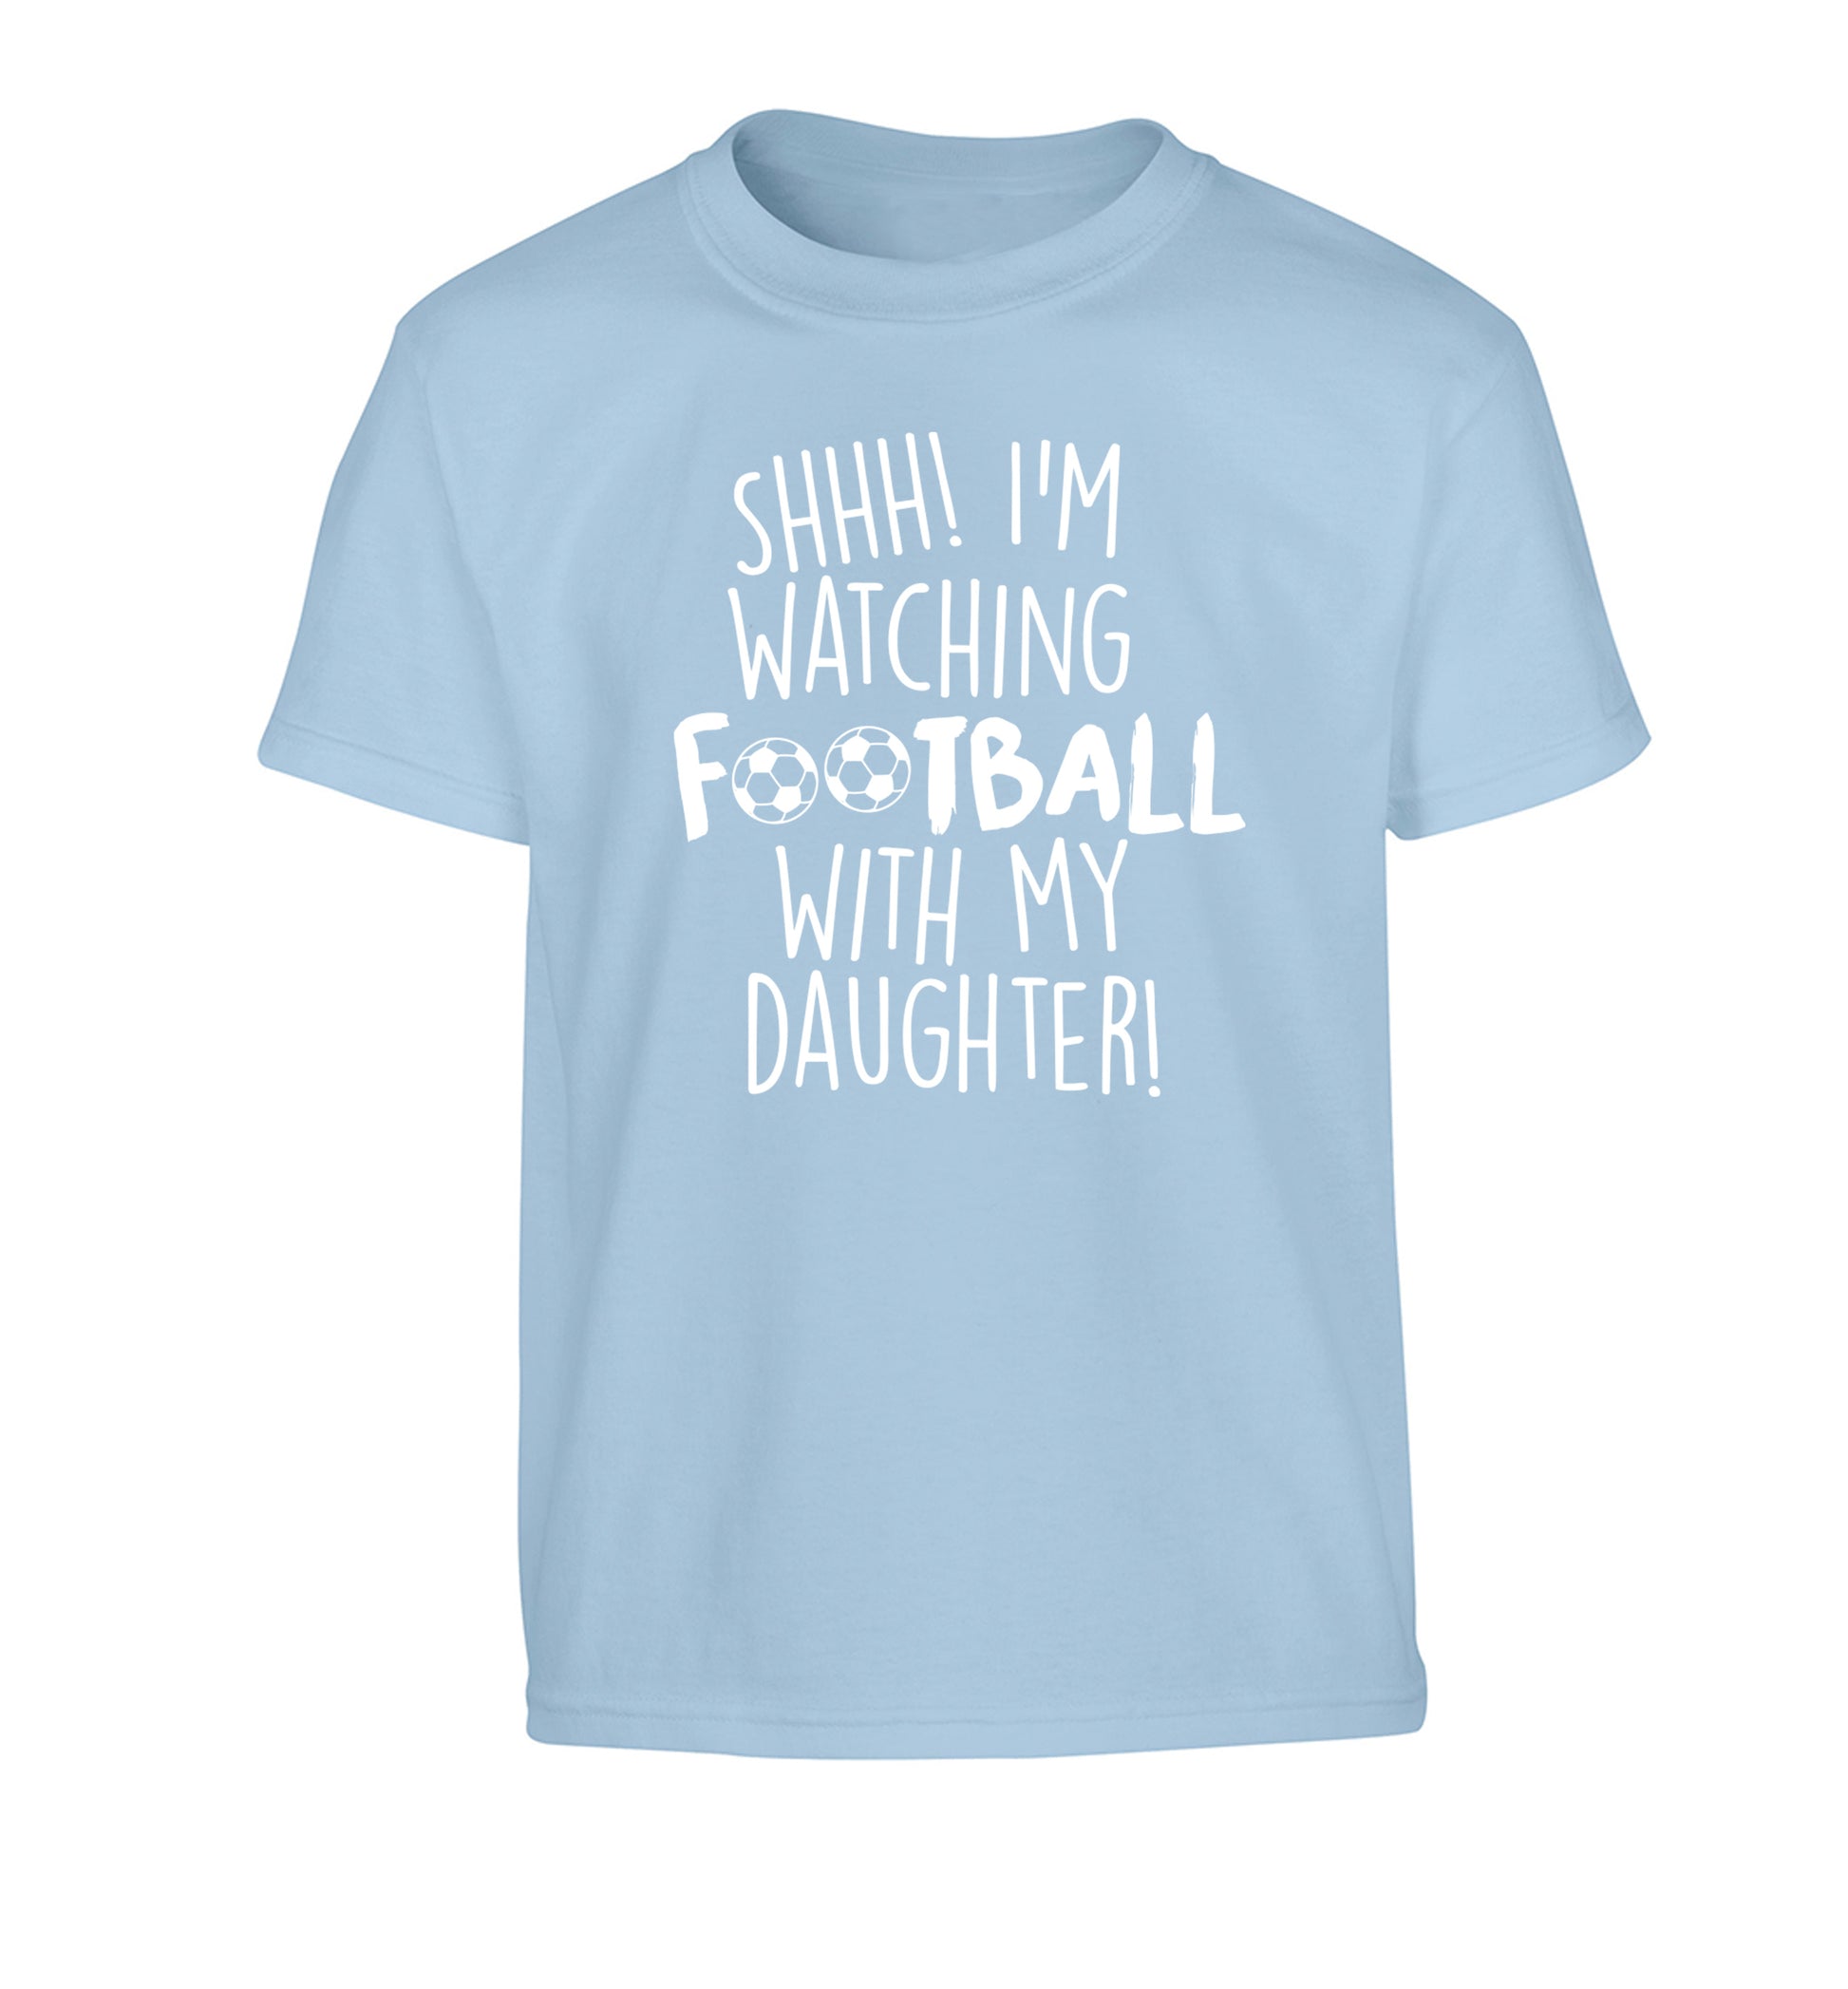 Shhh I'm watching football with my daughter Children's light blue Tshirt 12-14 Years